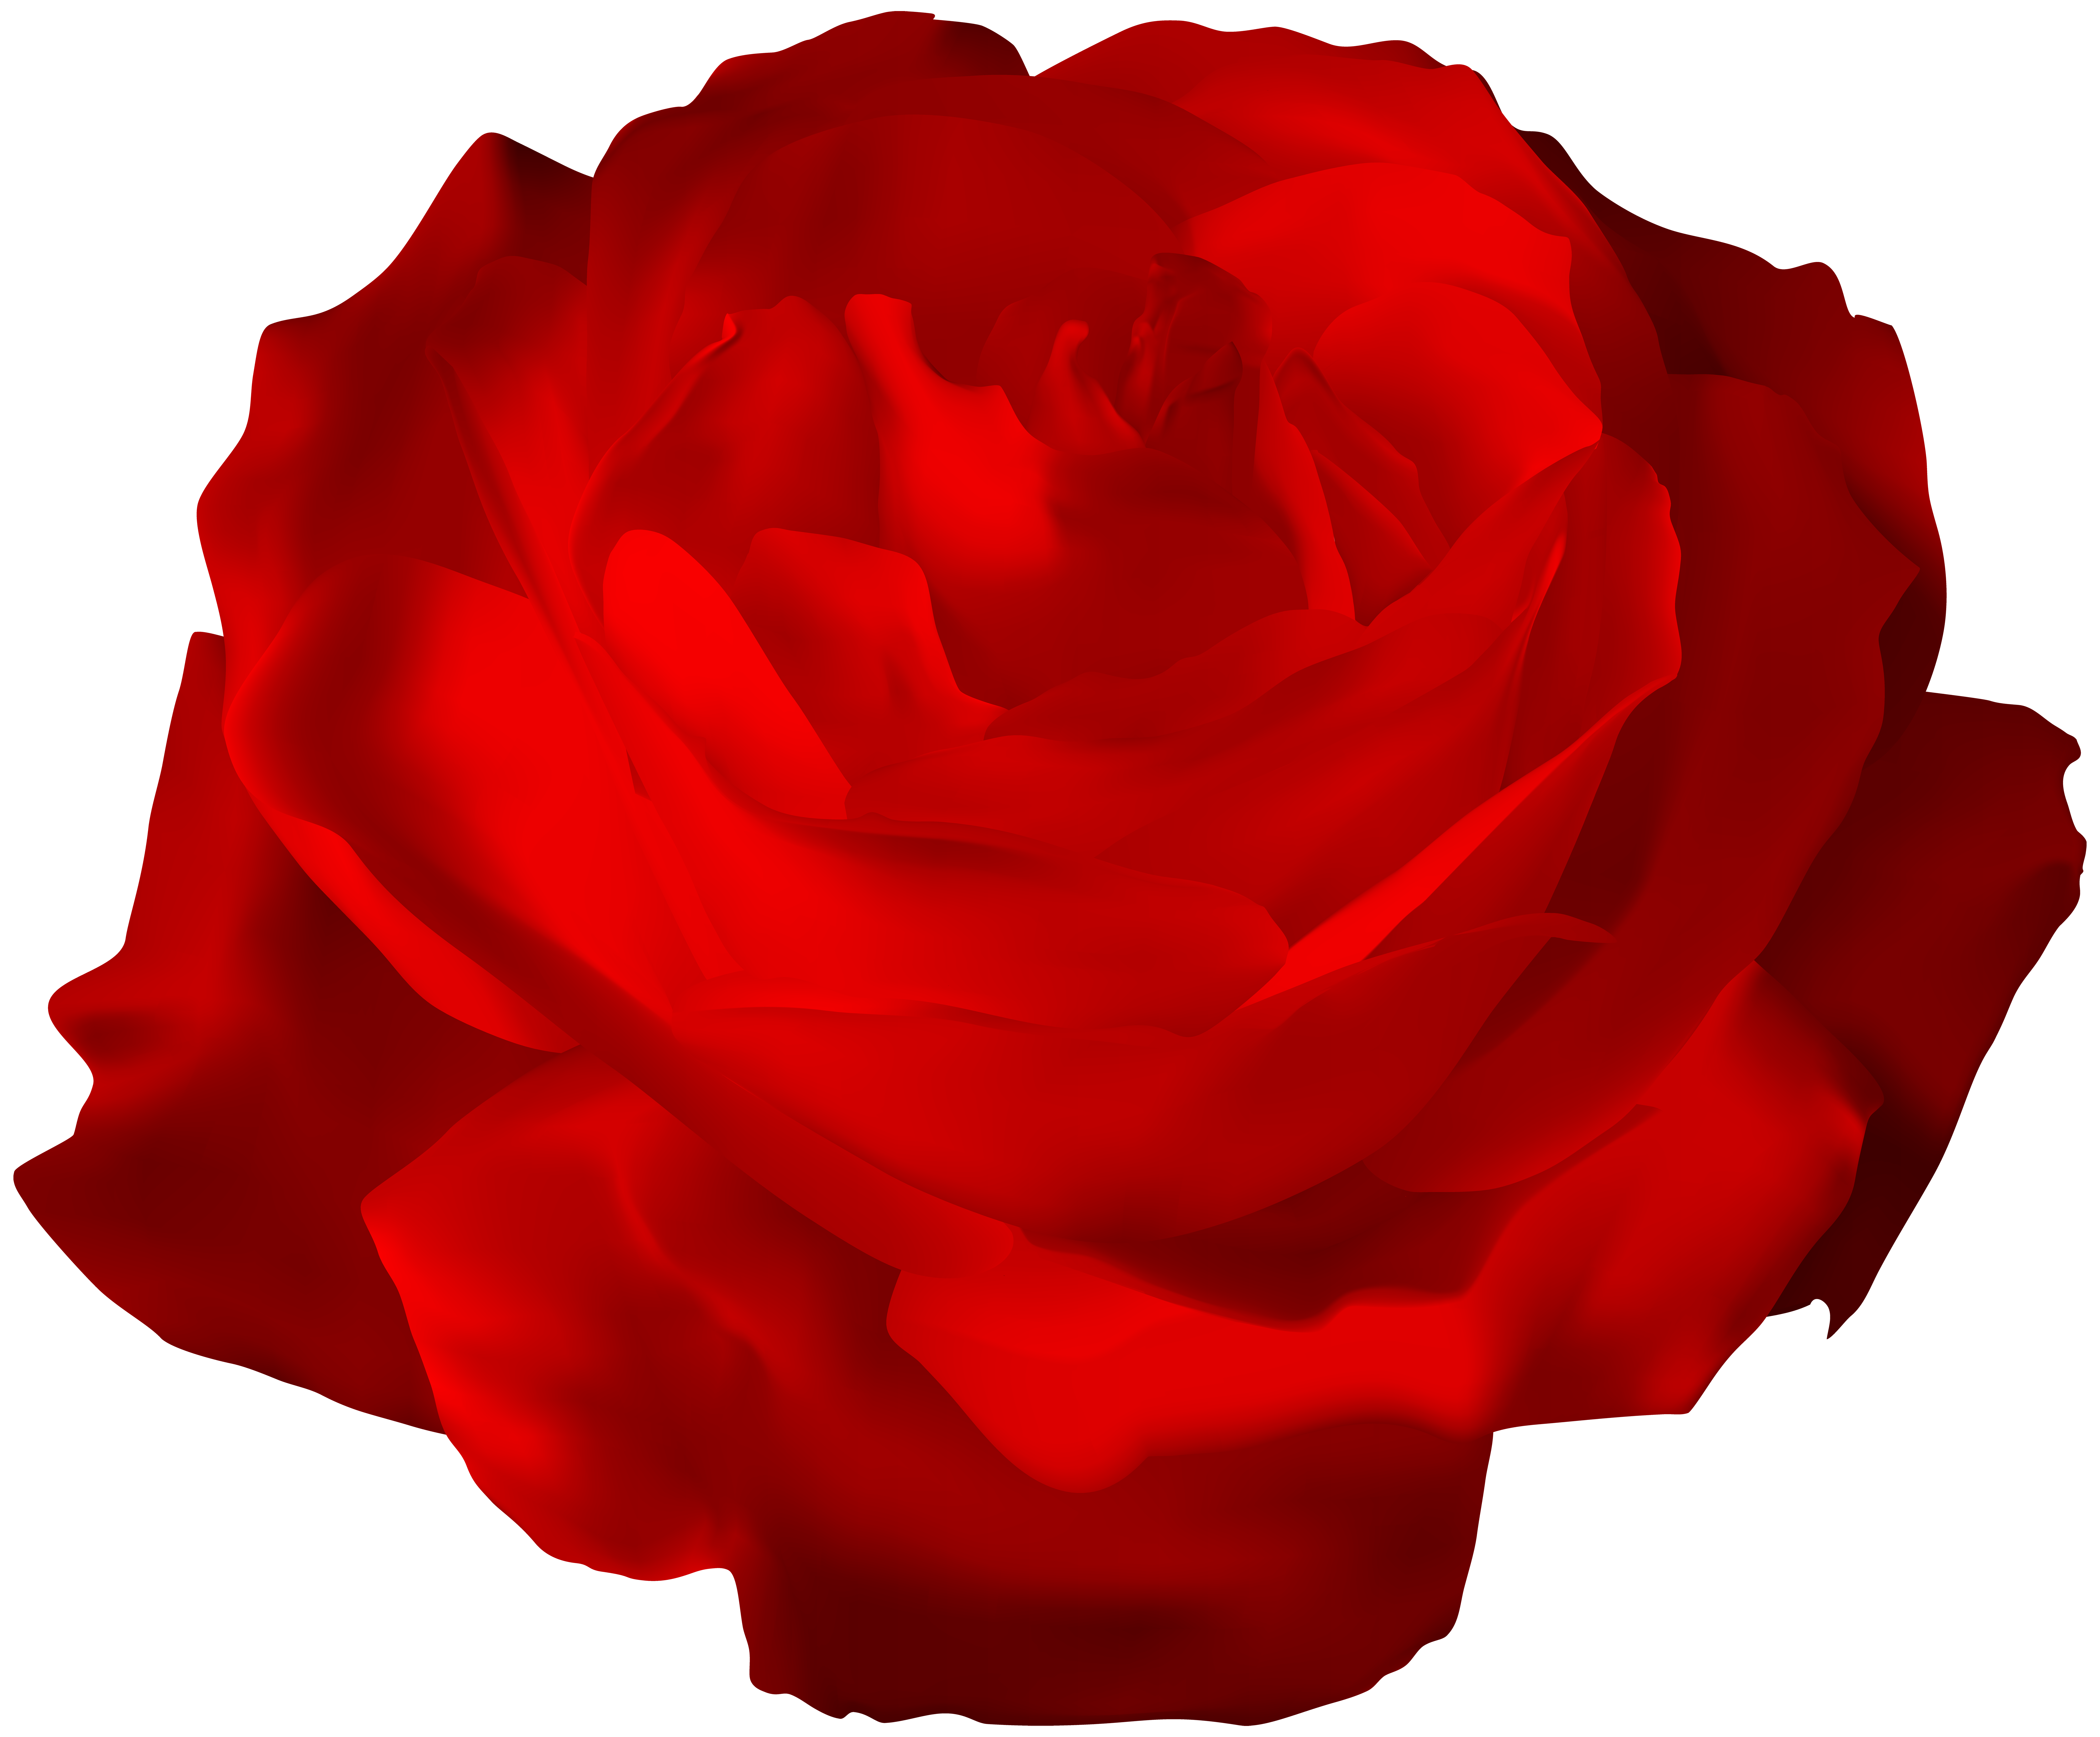 Red Rose Transparent PNG Clip Art Image | Gallery Yopriceville - High ...